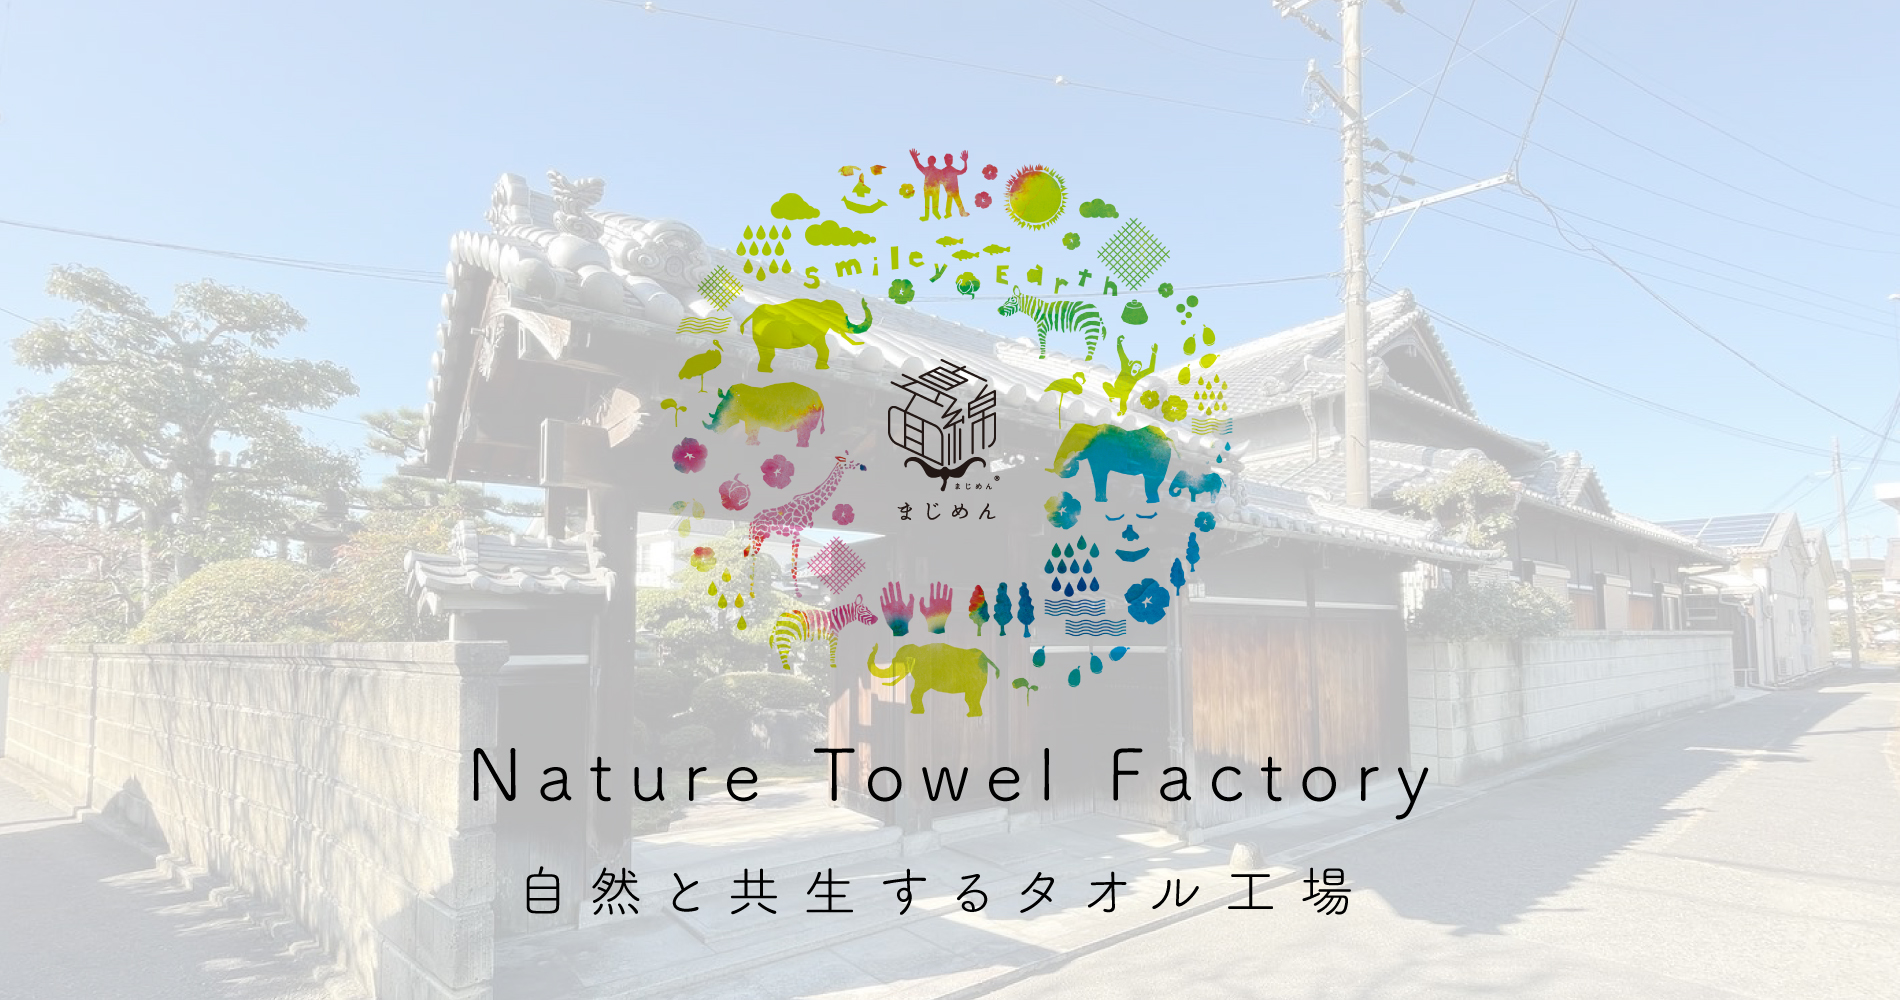 Nature Towel Factory Project